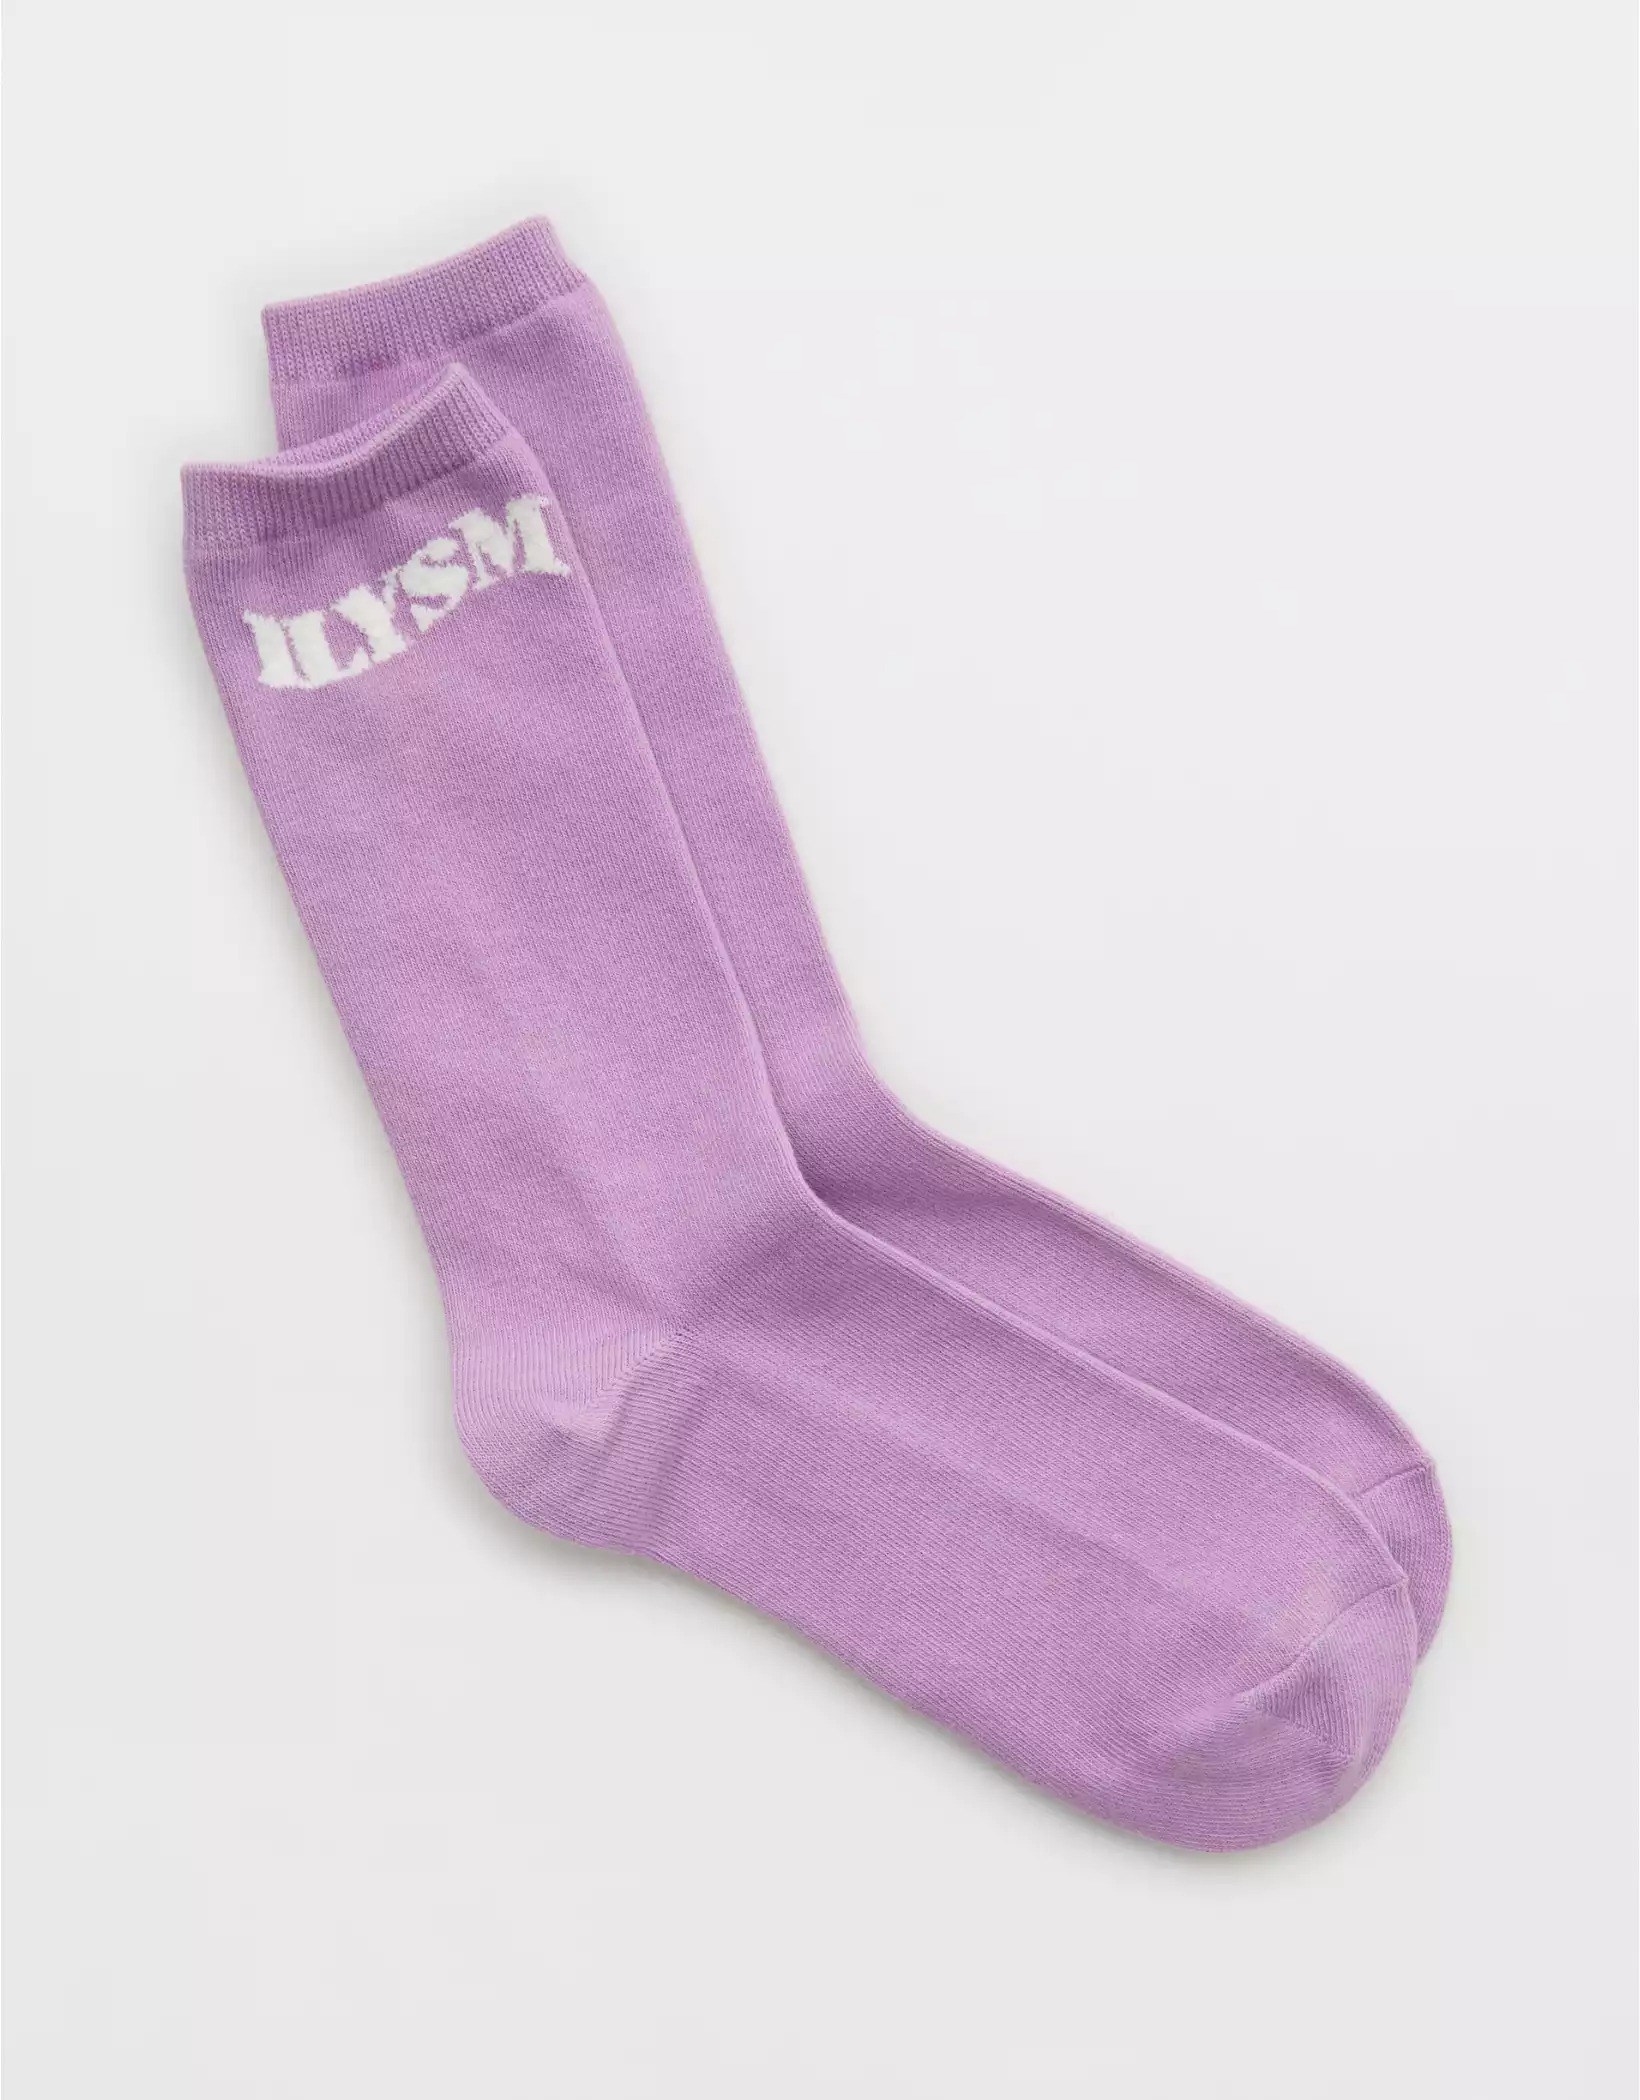 The socks in lavender with the acronym &quot;ILYSM&quot;